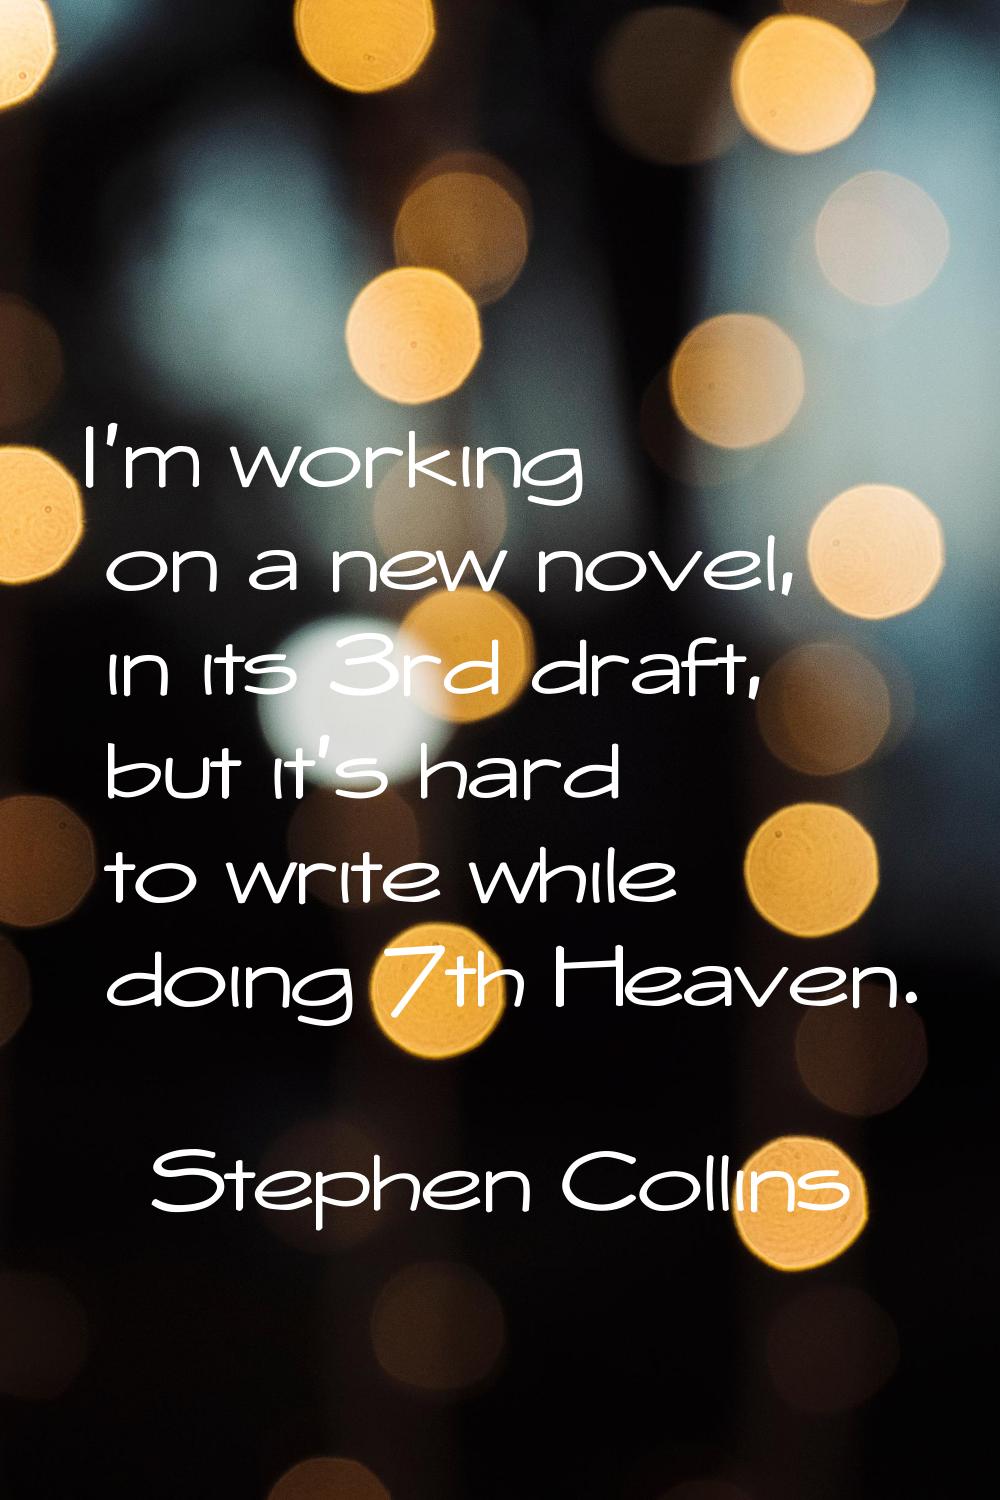 I'm working on a new novel, in its 3rd draft, but it's hard to write while doing 7th Heaven.